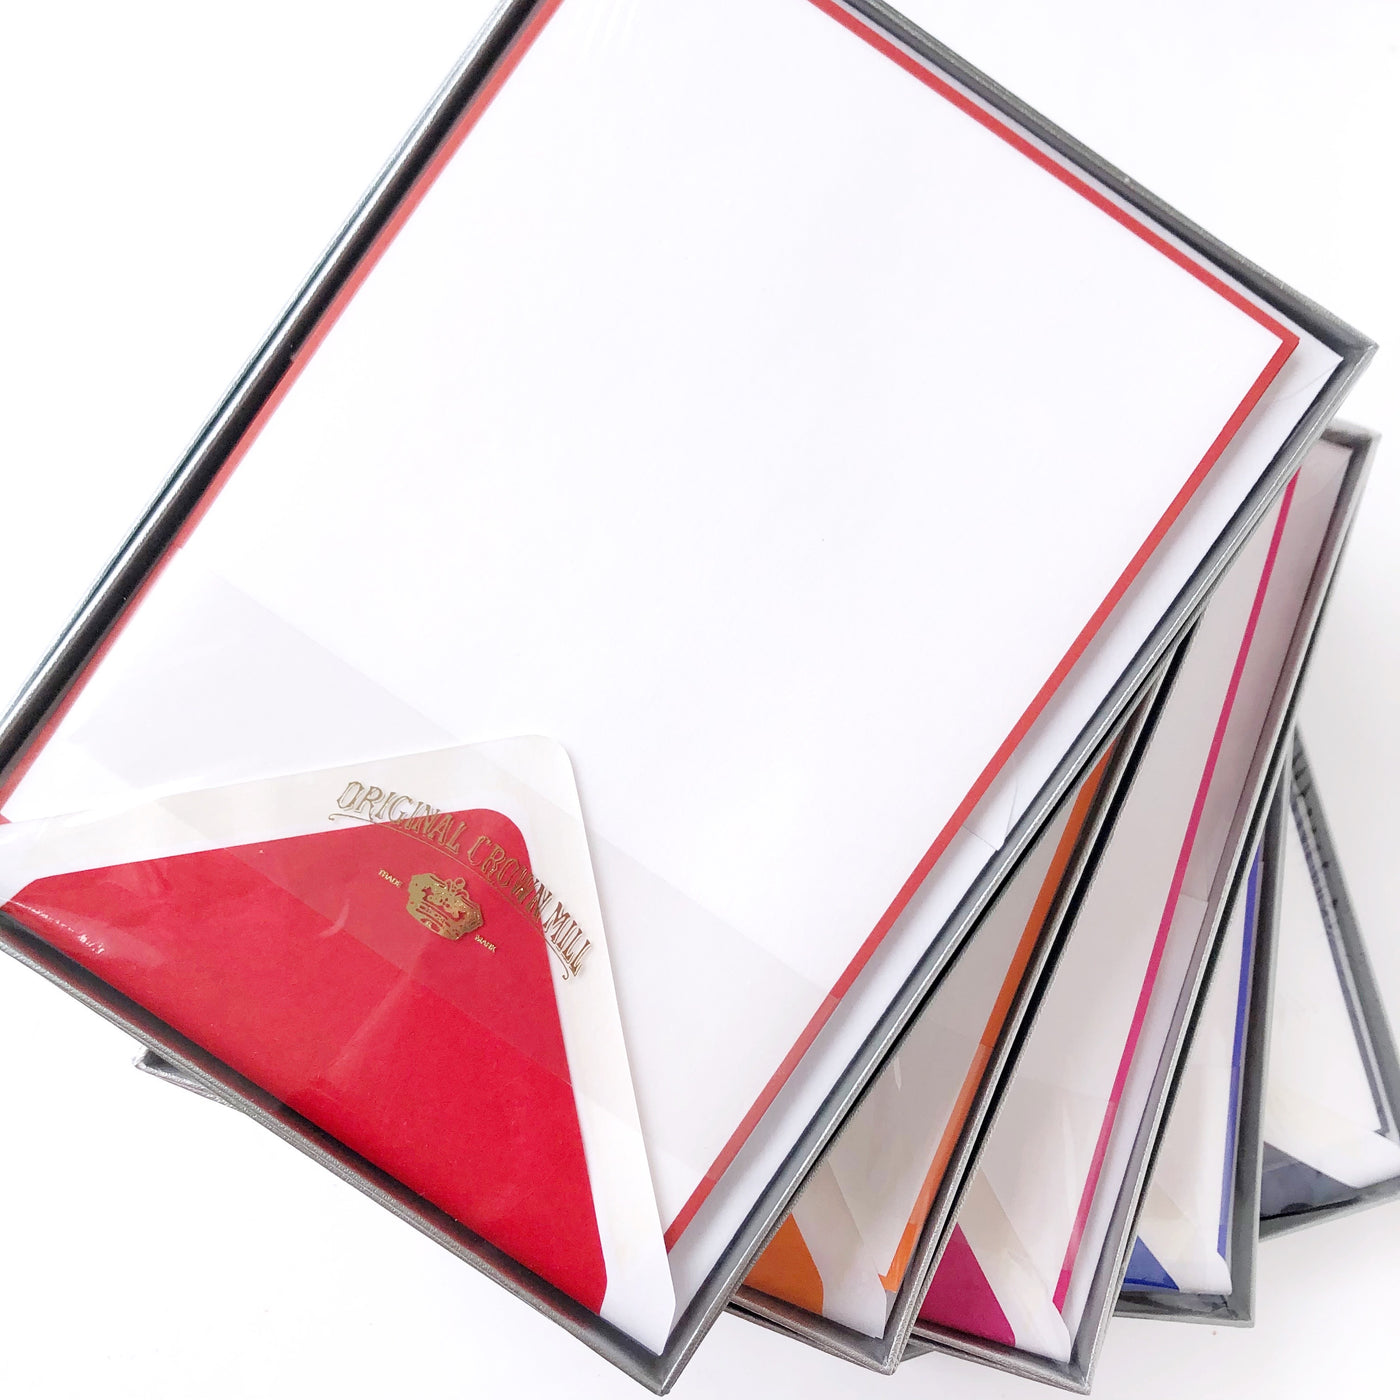 Bordered Stationery Sheets w/Tissue Lined Envelope - Barque Gifts